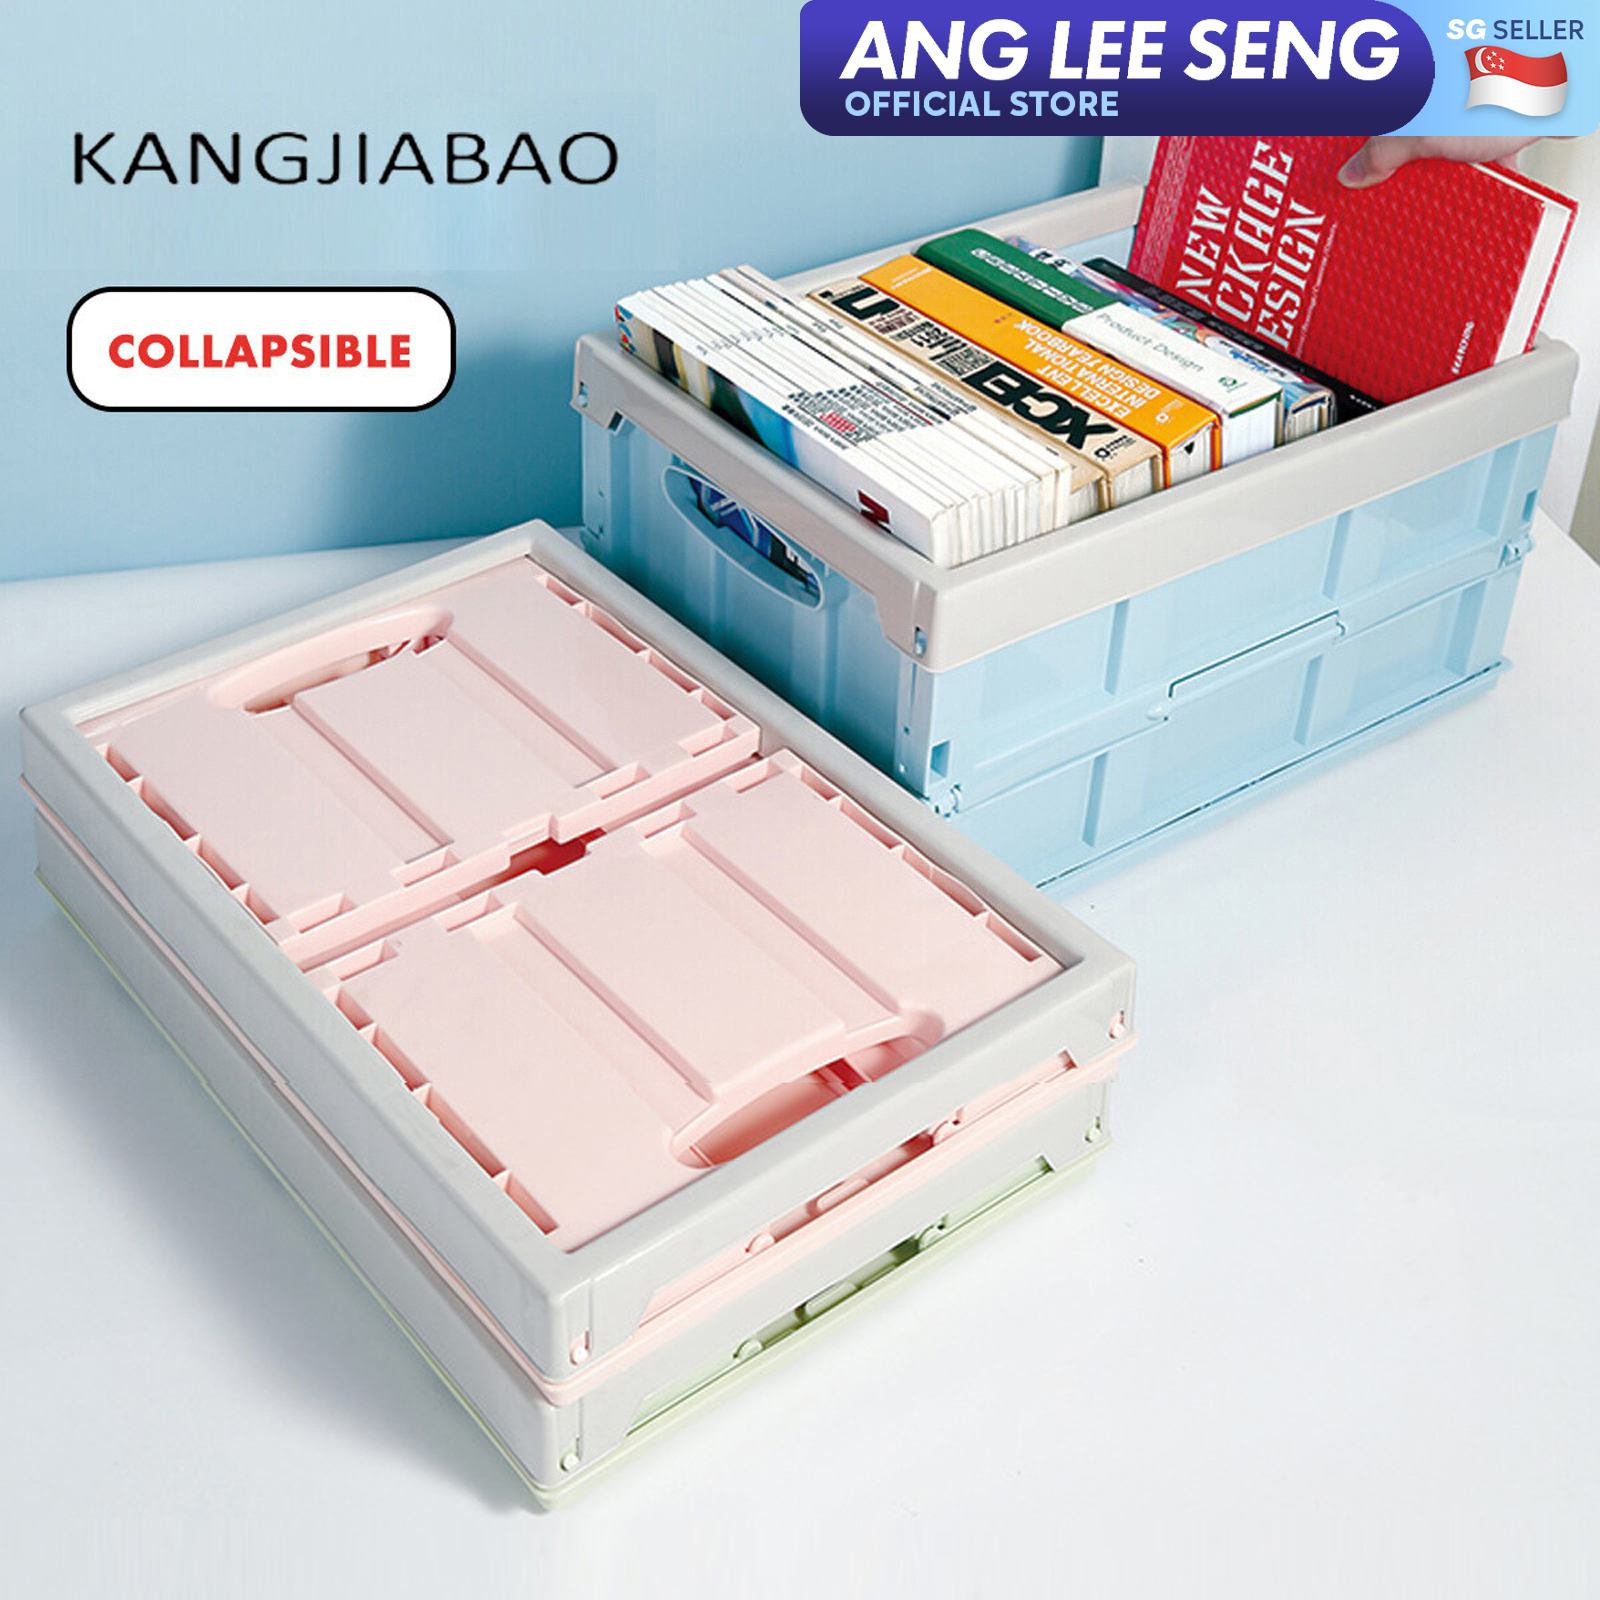 KJB Collapsible Storage Box Crate - For Home/Office/Car